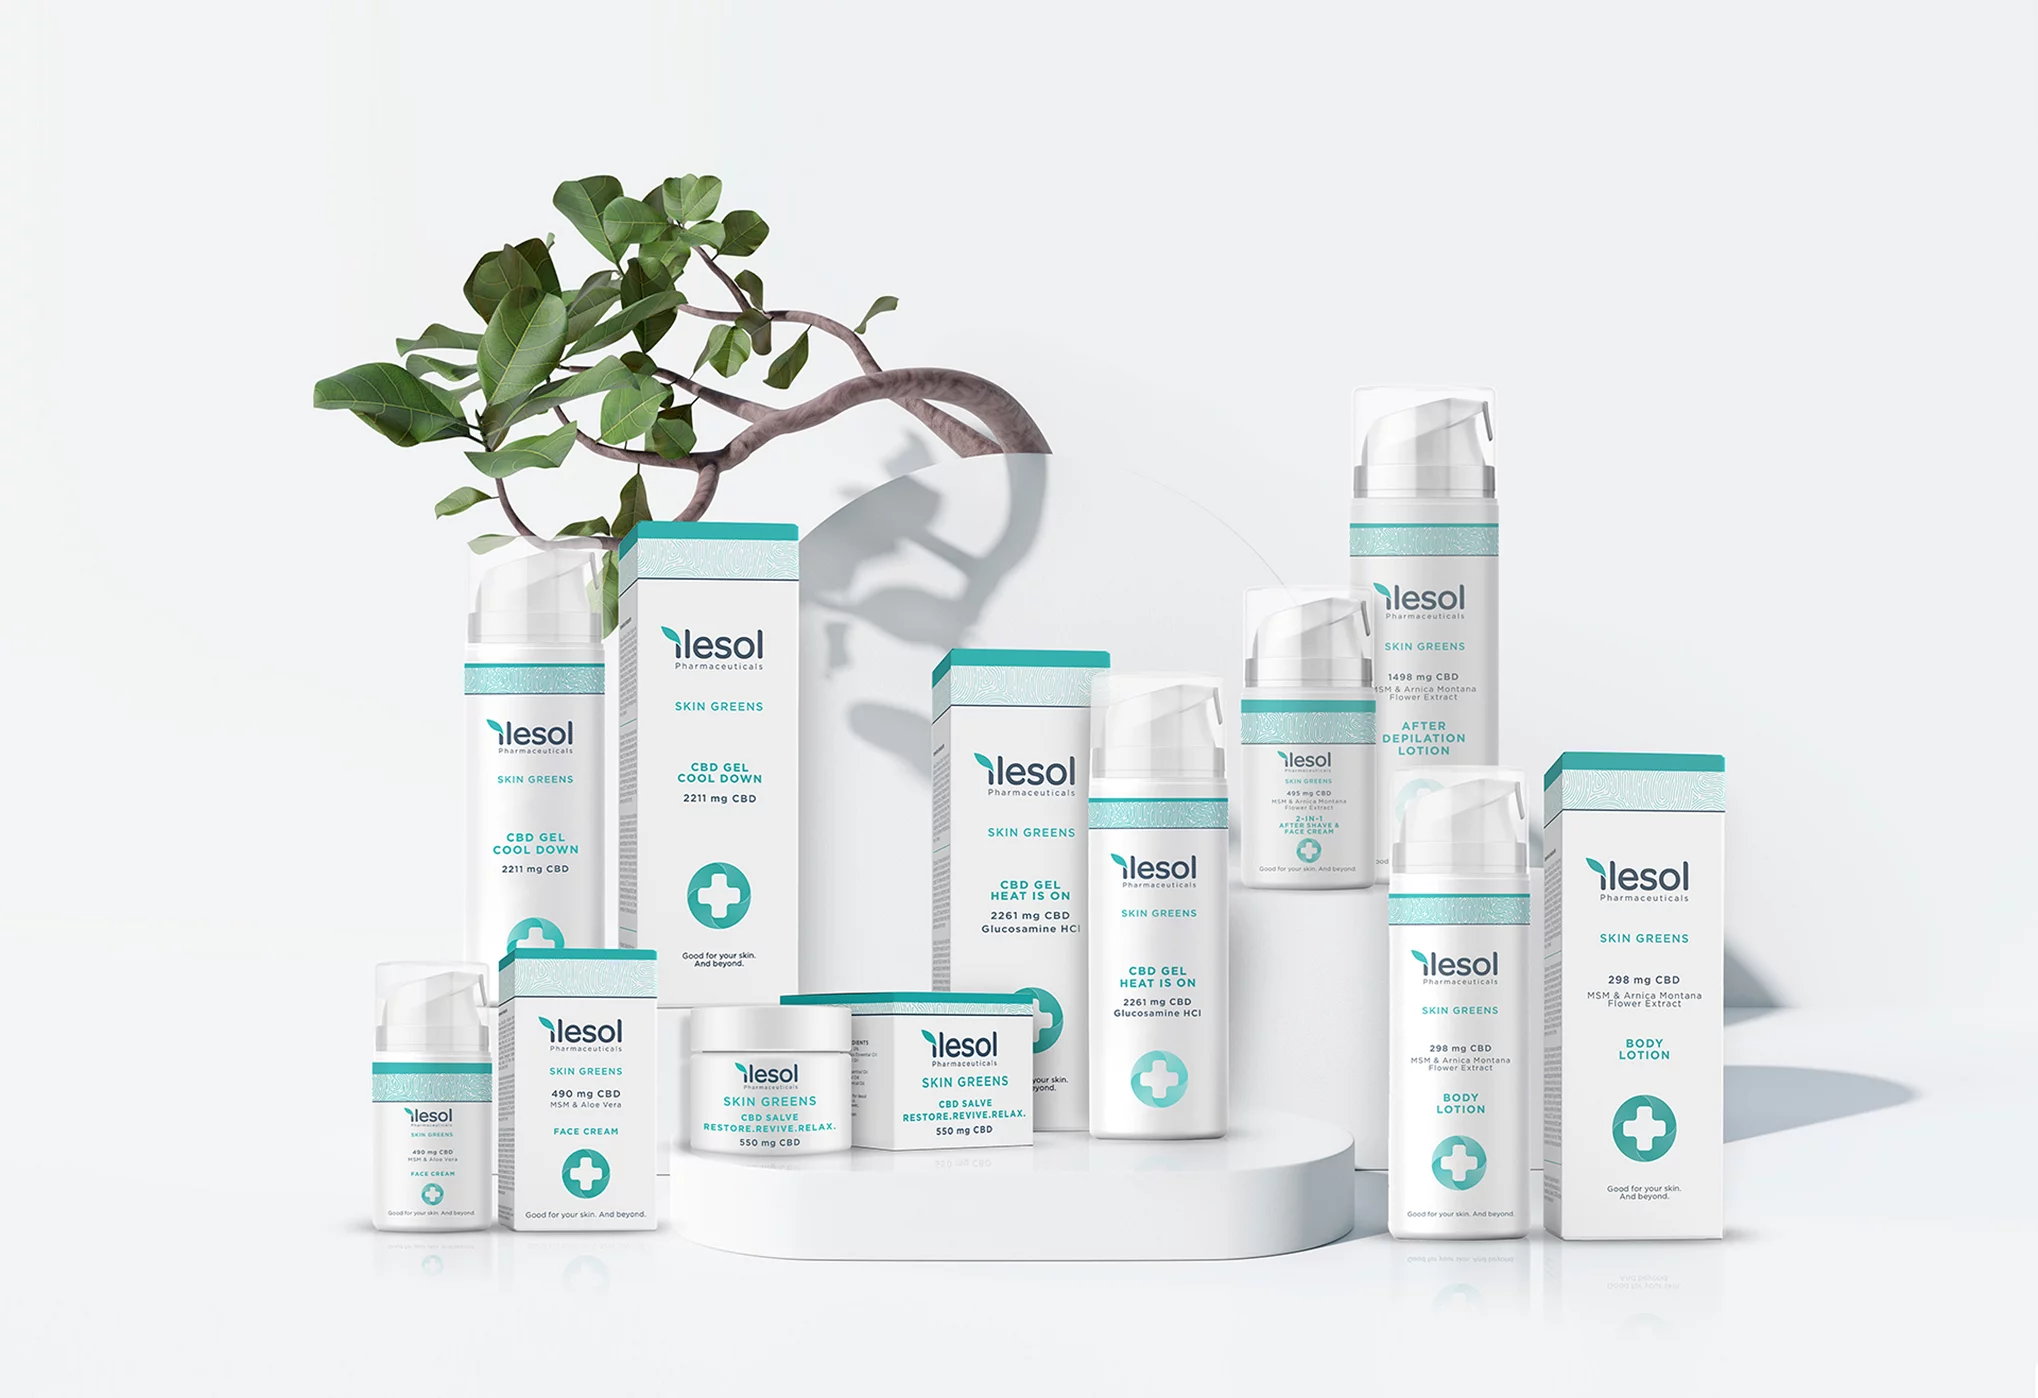 Available now
Discover now the SKIN GREENS - CBD SKINCARE LINE from ILESOL Pharmaceuticals. Skin Greens is a collection of products for healthy and natural skin care based on CBD and high-quality plant-based active ingredients.